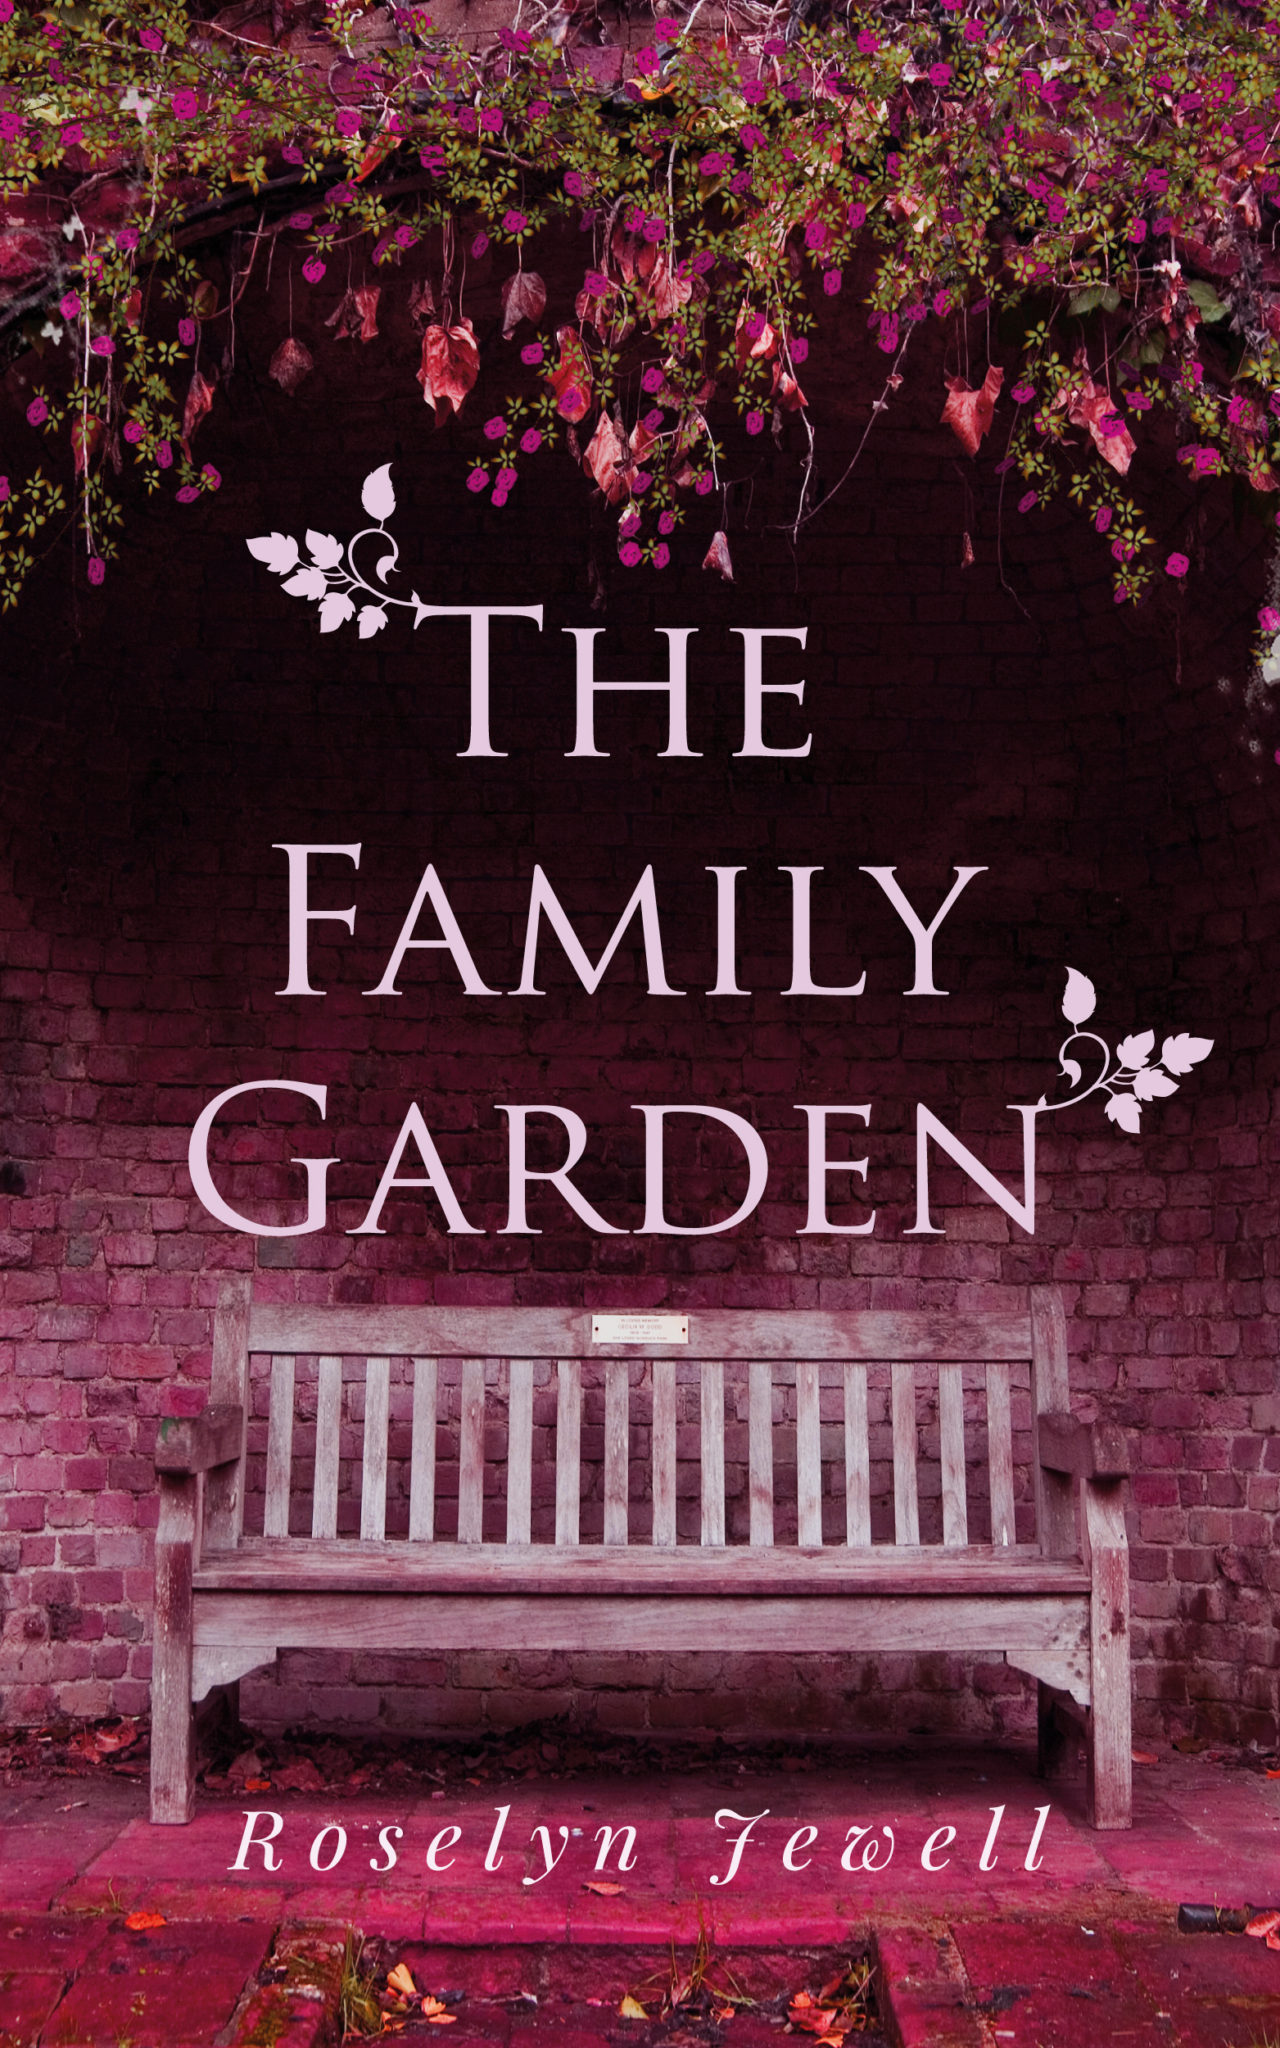 The Family Garden by Roselyn Jewell